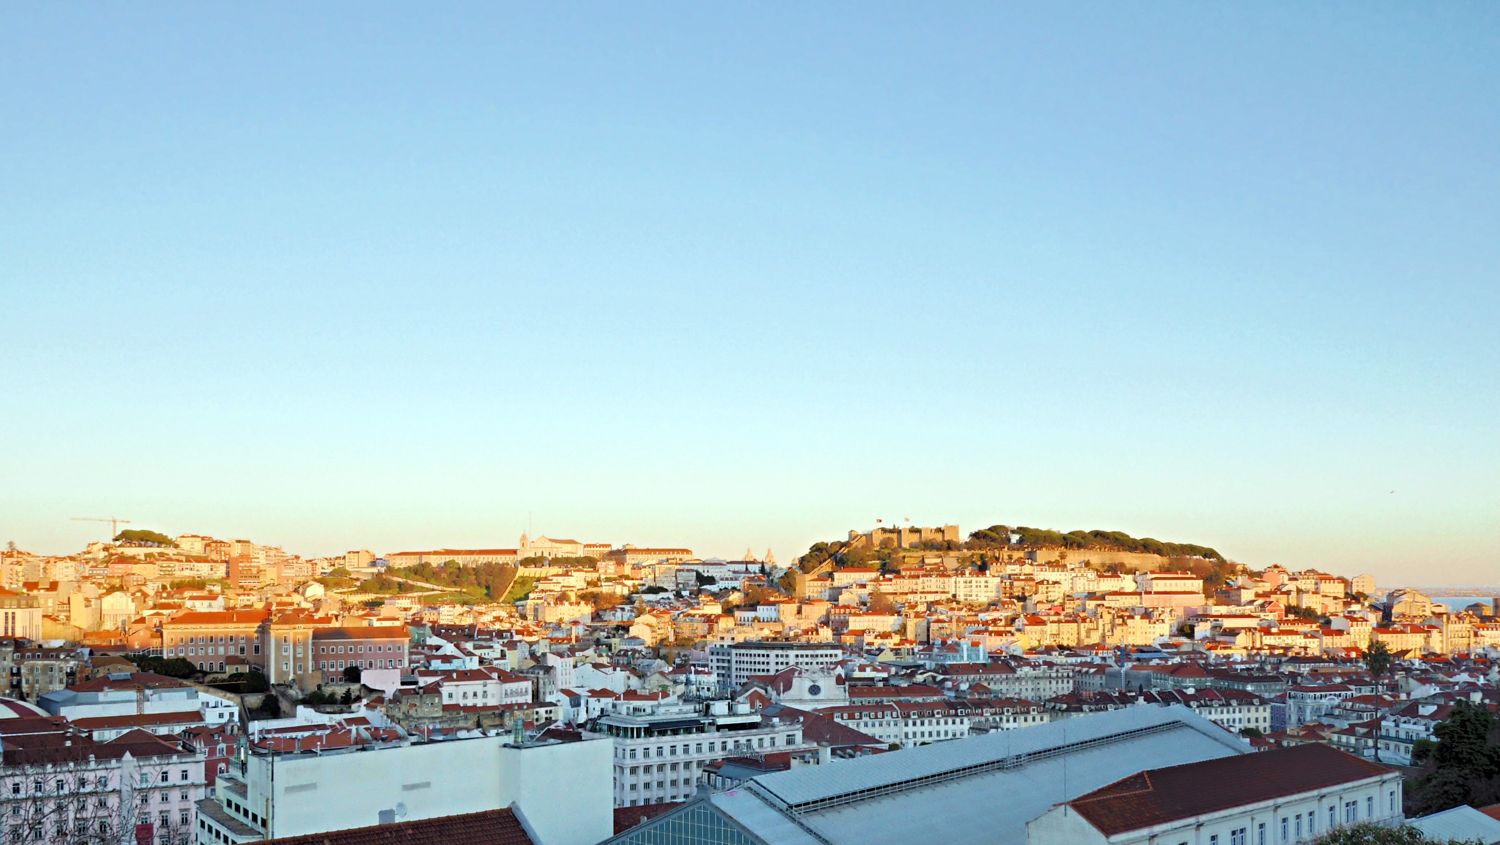 Travel Guide For Portugal | Tourist Attractions In Portugal | Hortense Travel Guide And Itineraries